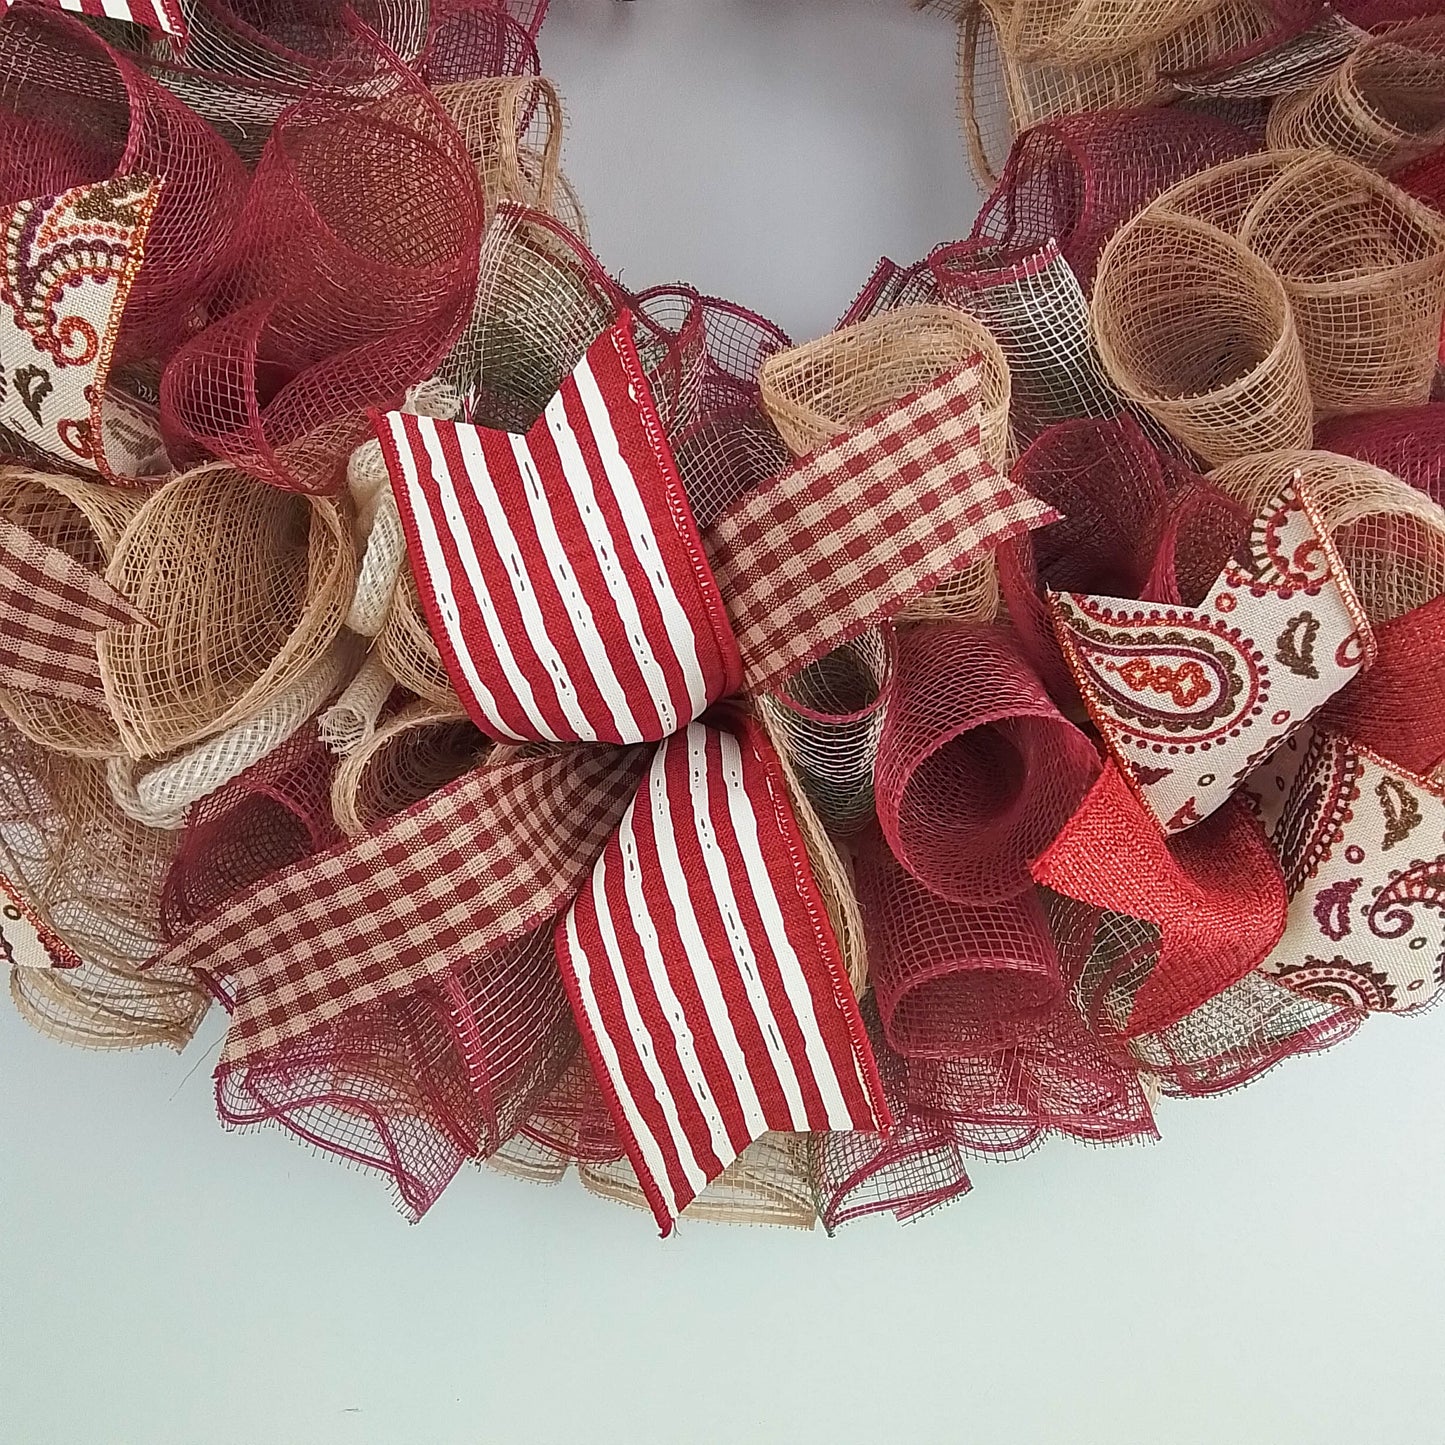 Burgundy Wreath - Everyday Mother's Day Gift